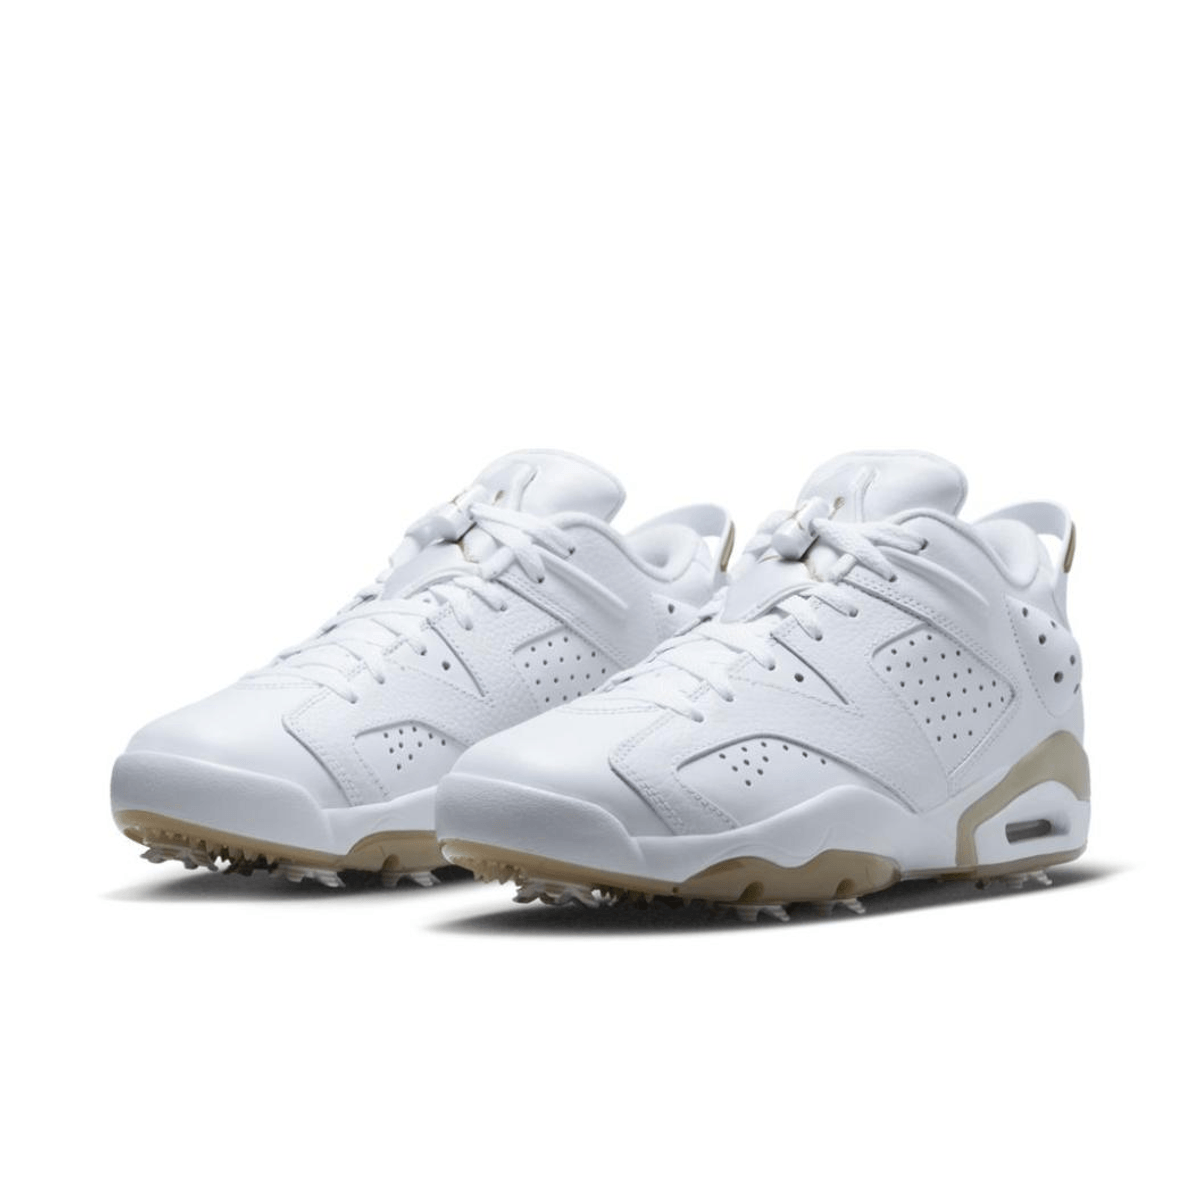 Jordan Brand Looks To Expand Their Golf Collection With The Air Jordan 6 Low Golf White/Khaki